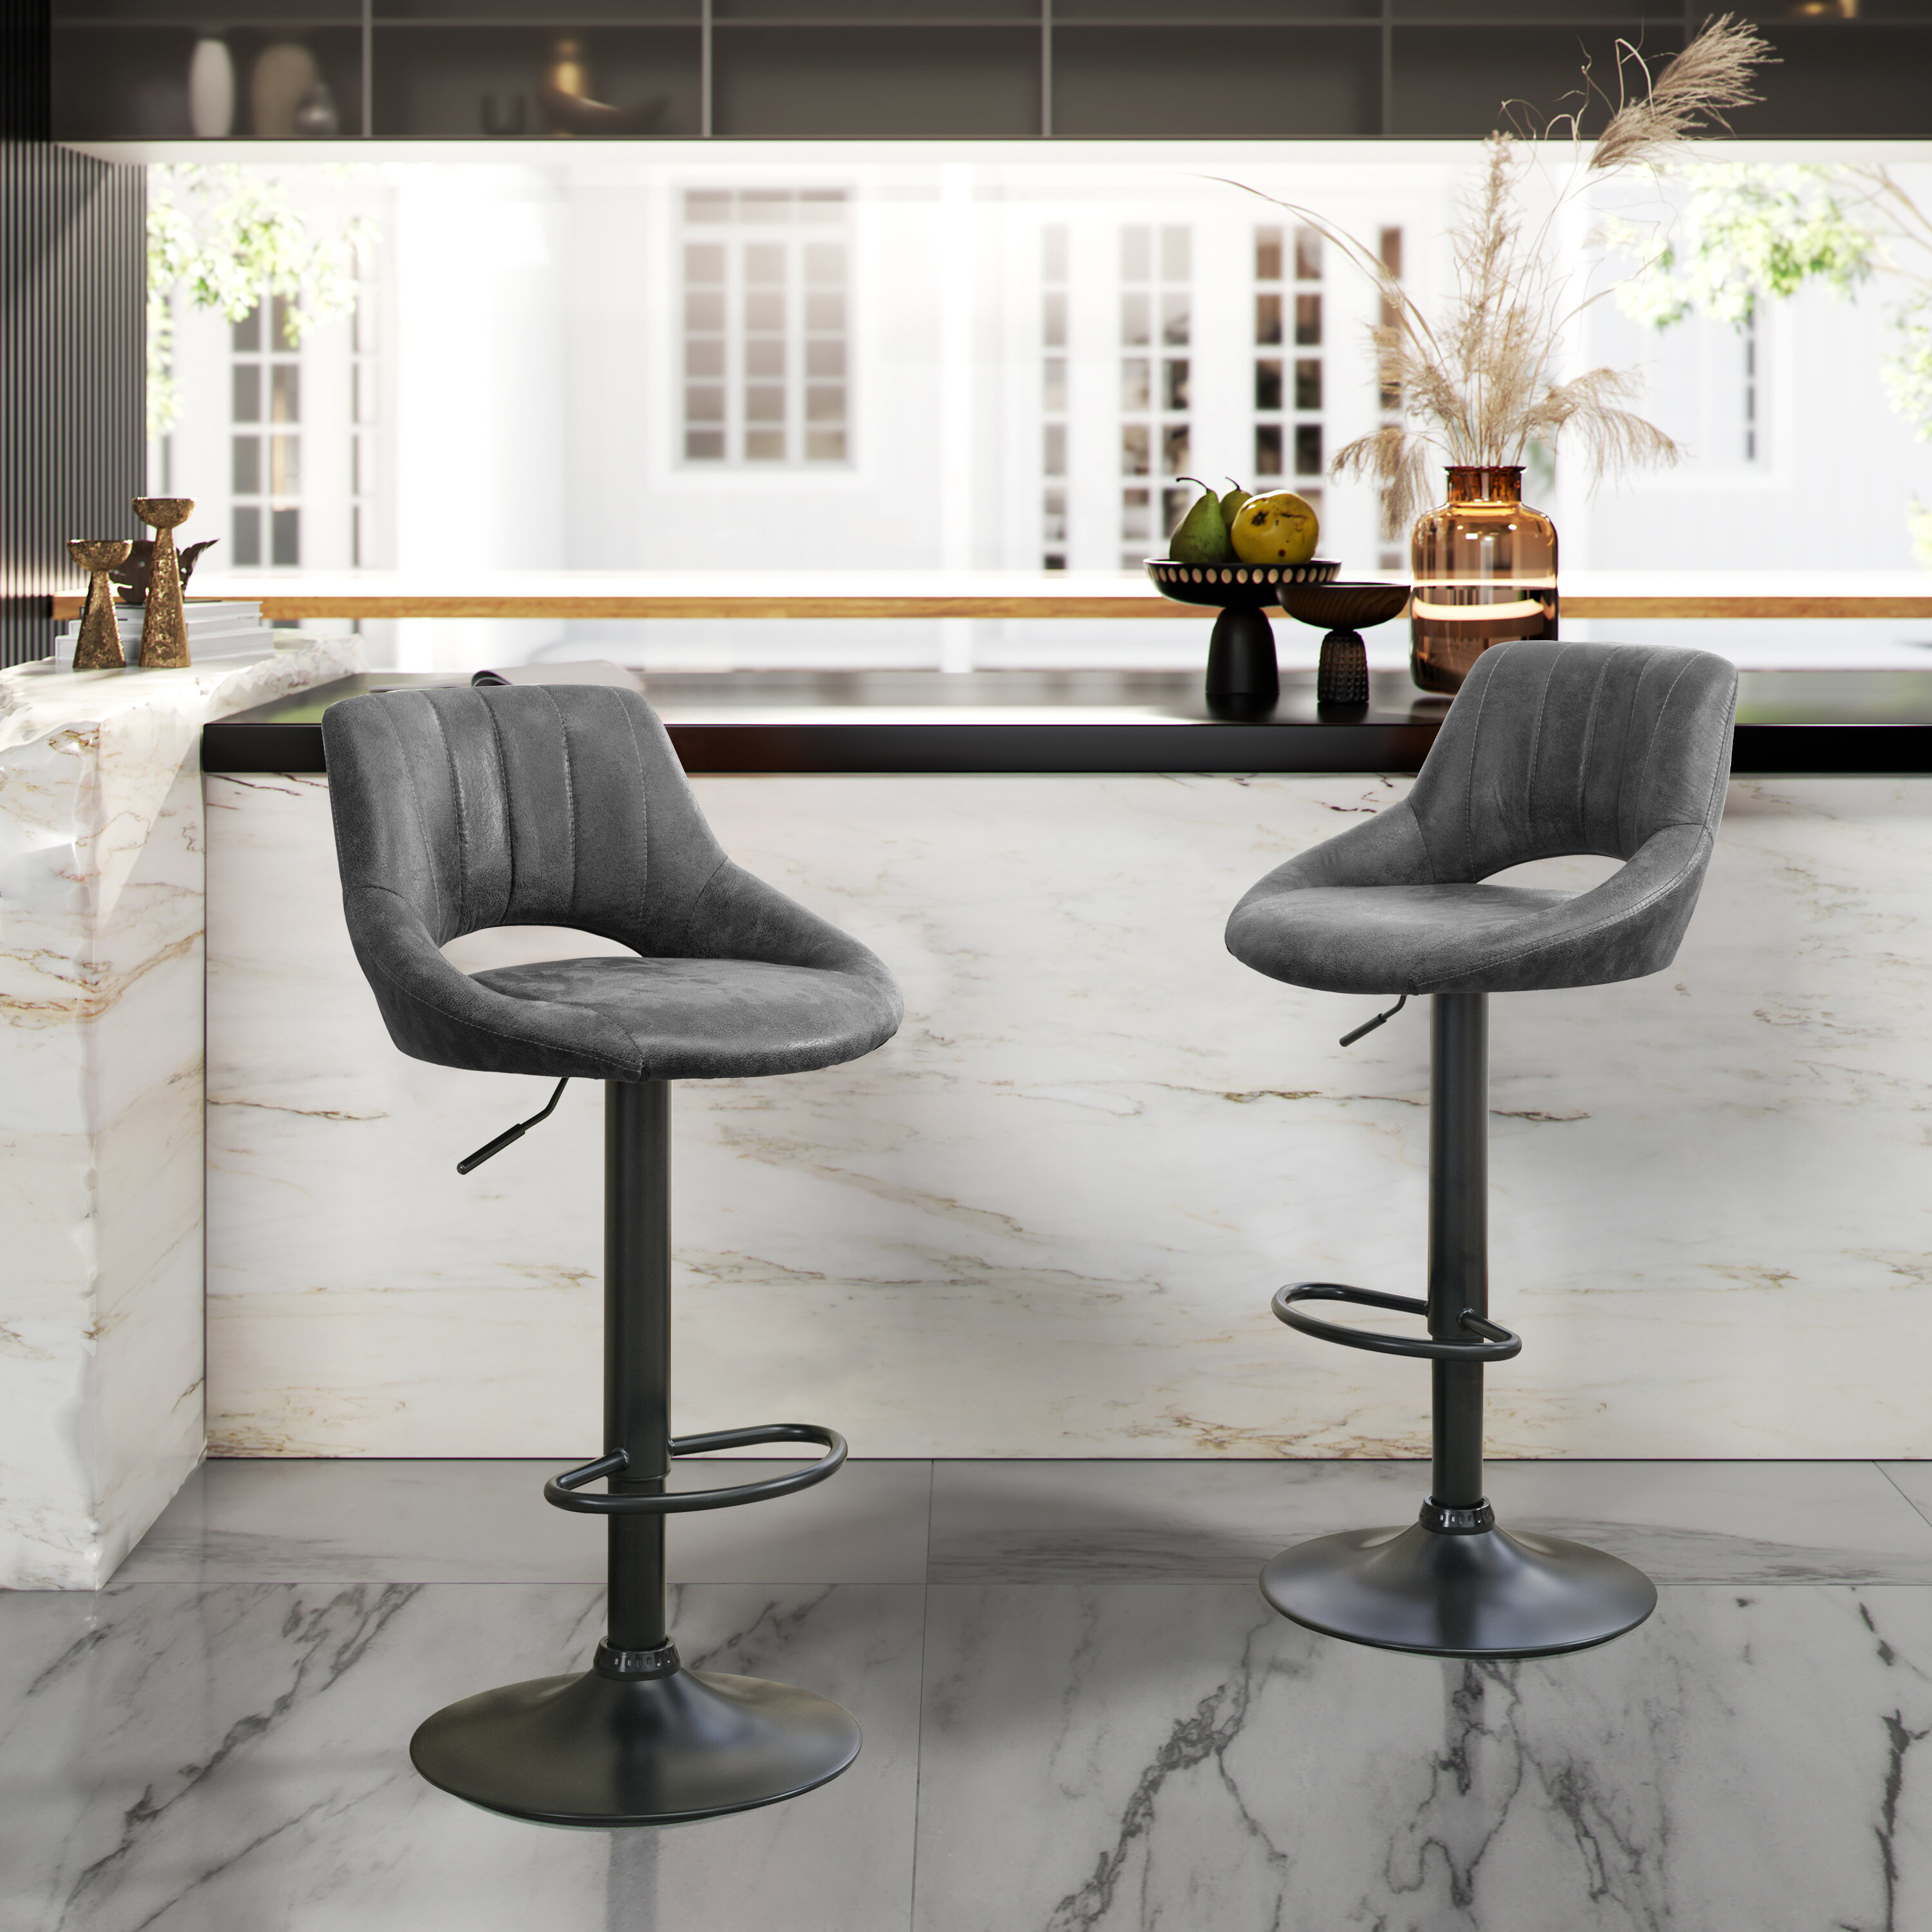 Set of 2 Bar Stools Counter Height Adjustable PU Leather Swivel Dining Chair US 